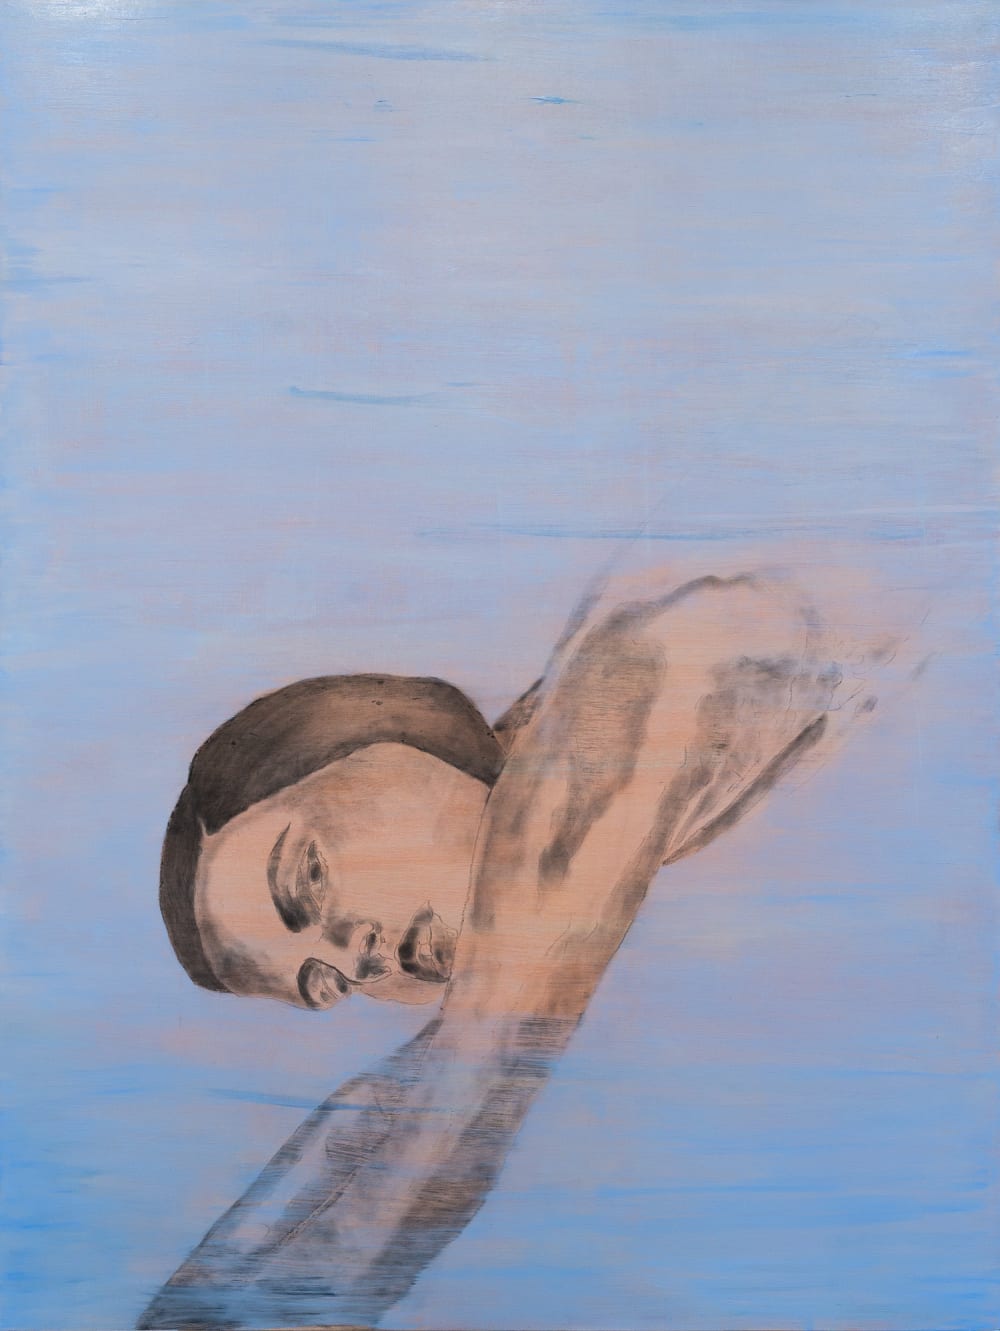 Zelga Simone Miller painting of a woman floating through a blue body of water